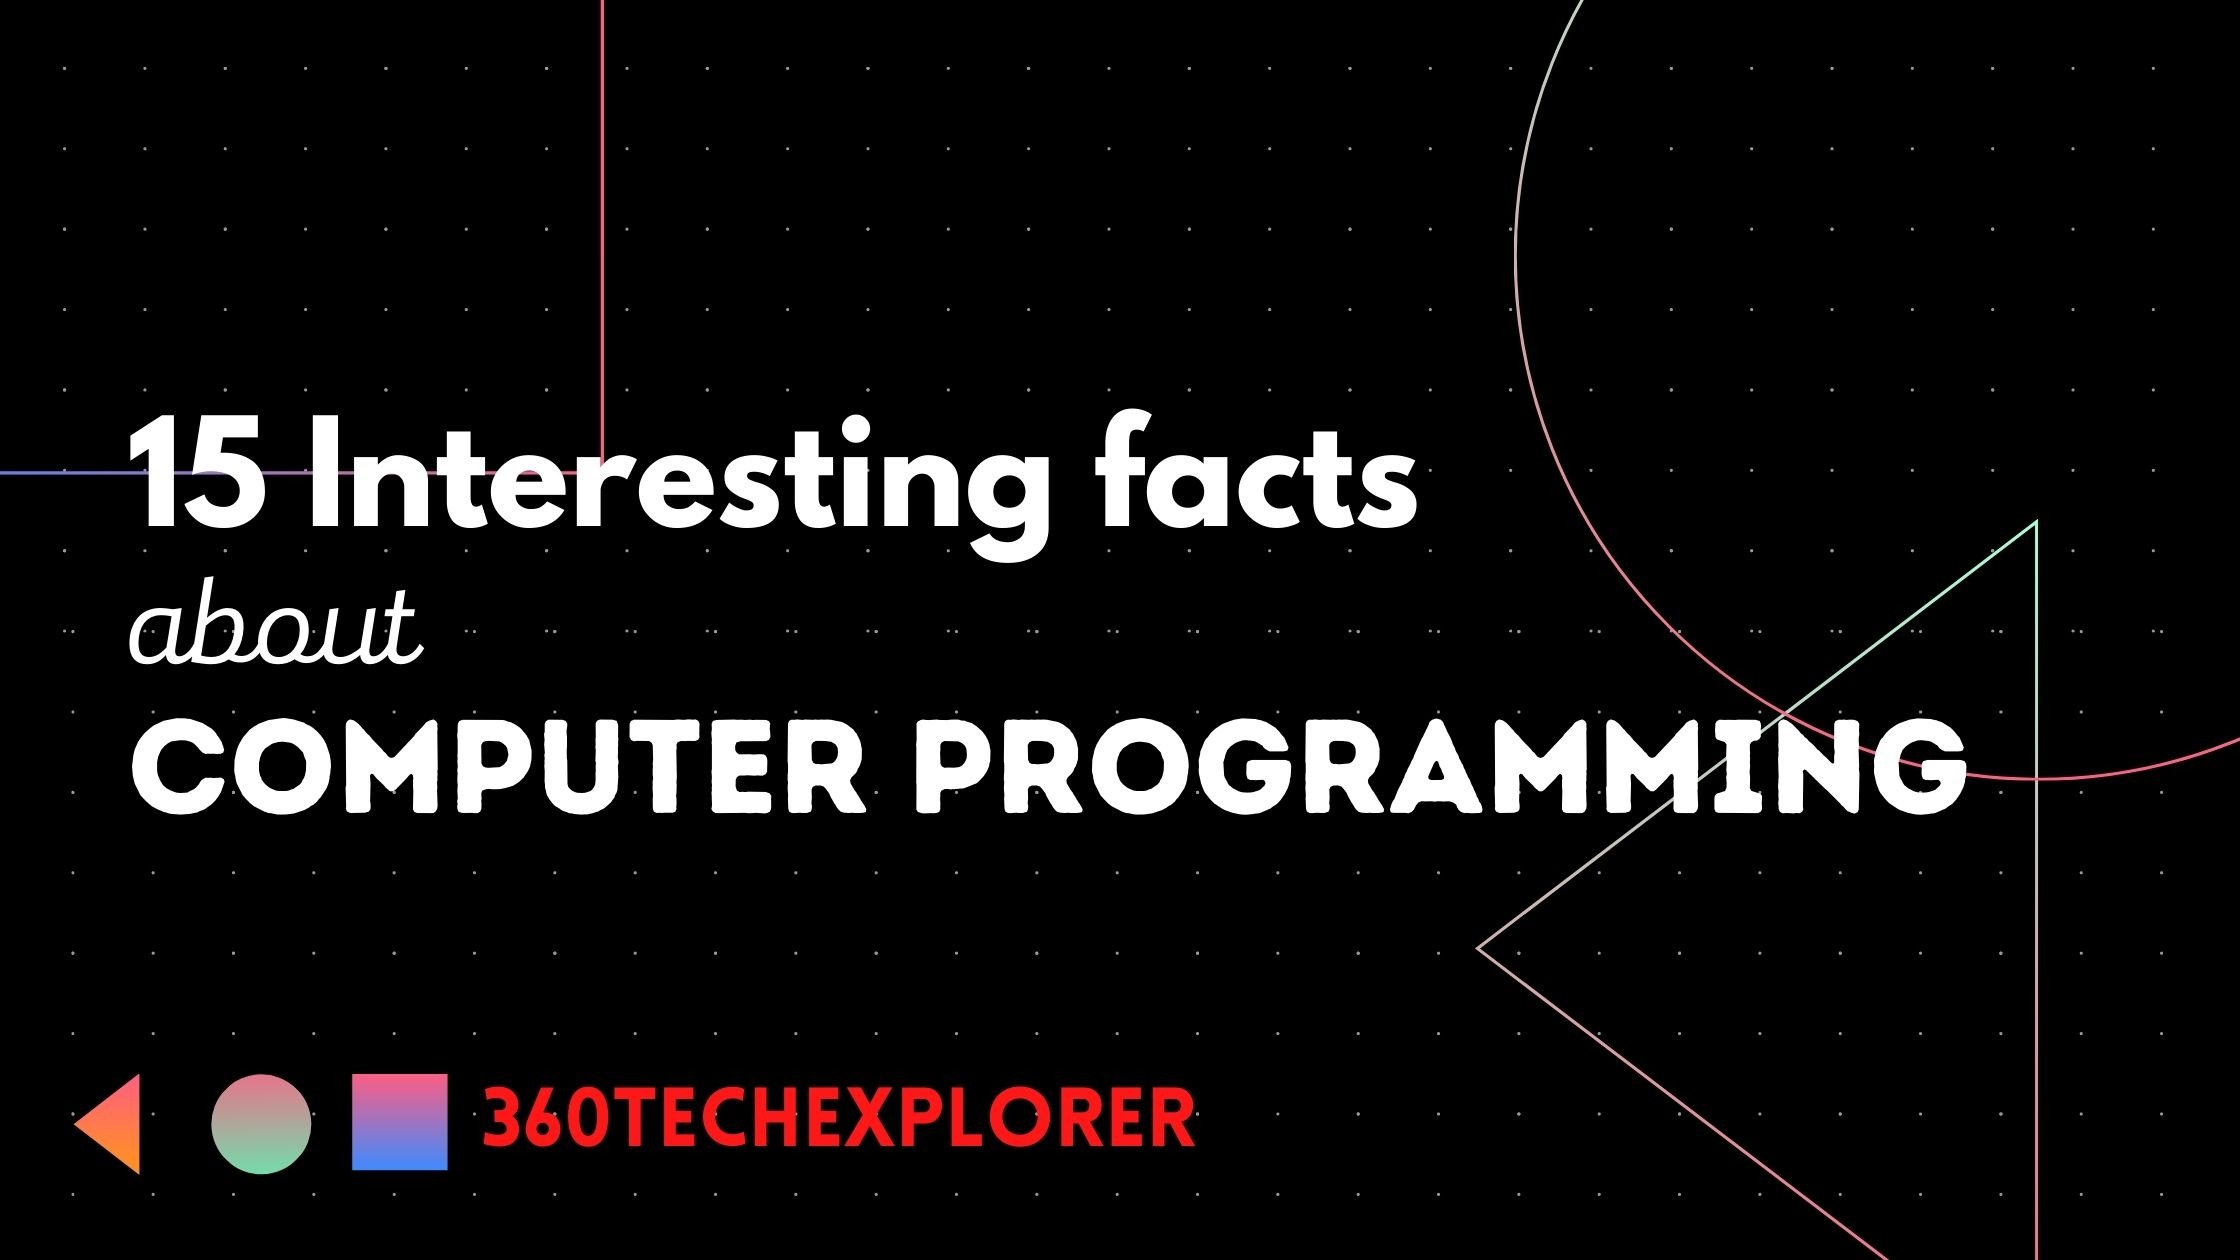 Facts about computer programming